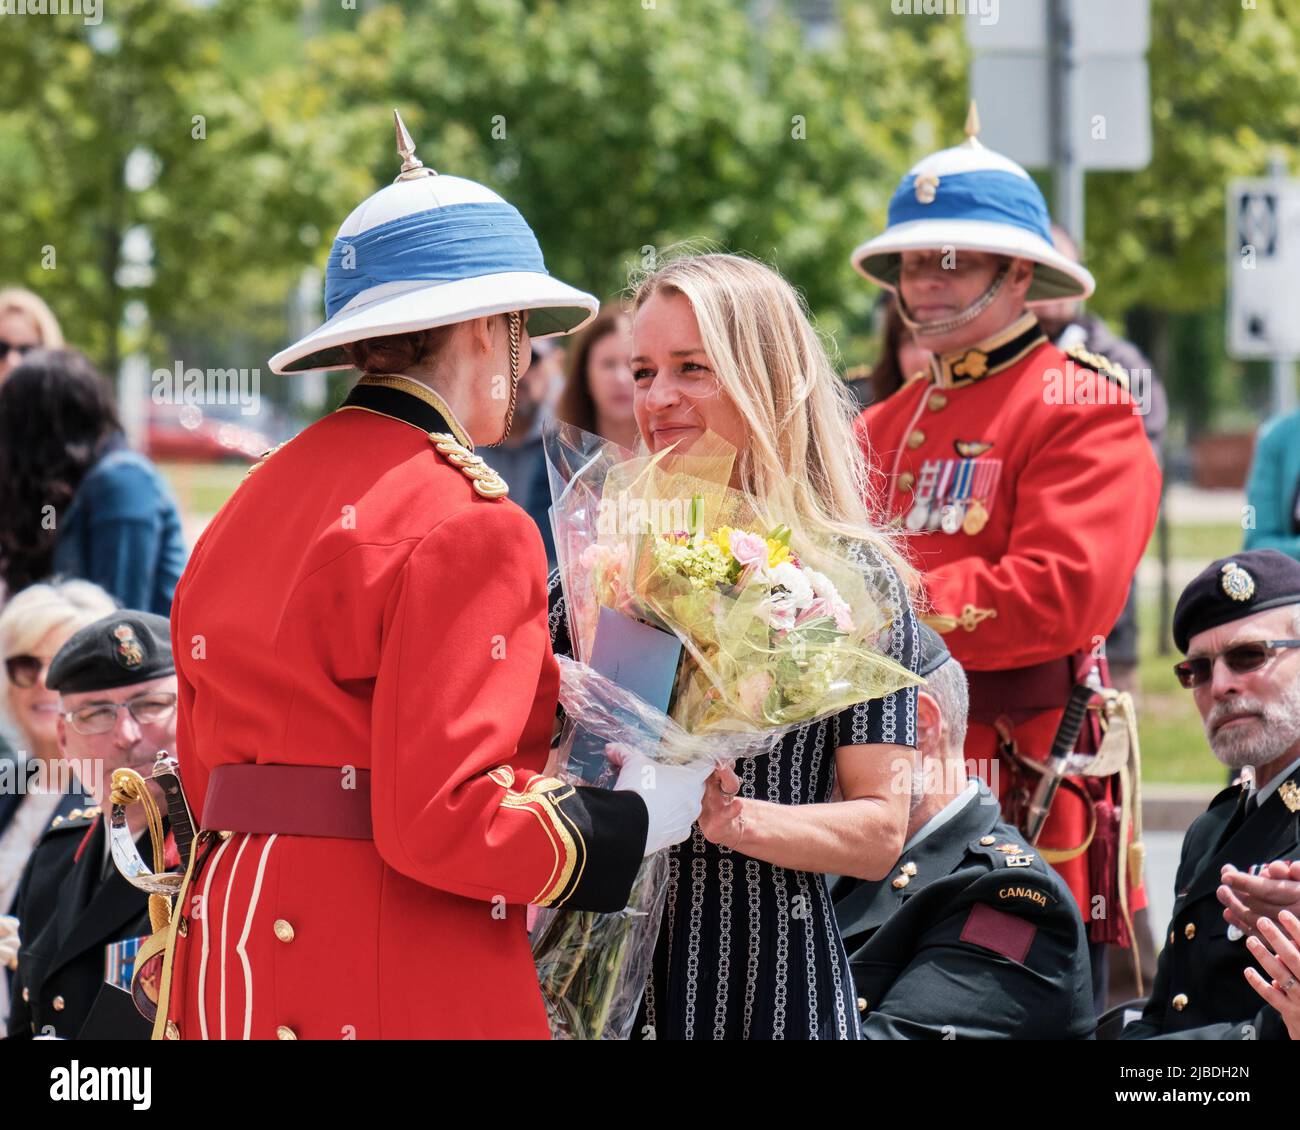 Halifax, Nova Scotia, June 5th, 2022. Lieutenant Colonel Rhonda Matthews takes over command of the Princess Louise Fusiliers at ceremony in Halifax. She here presents flowers to the wife of the exiting LCol Barry Pitcher seen behind. Credit: meanderingemu/Alamy Live News Stock Photo